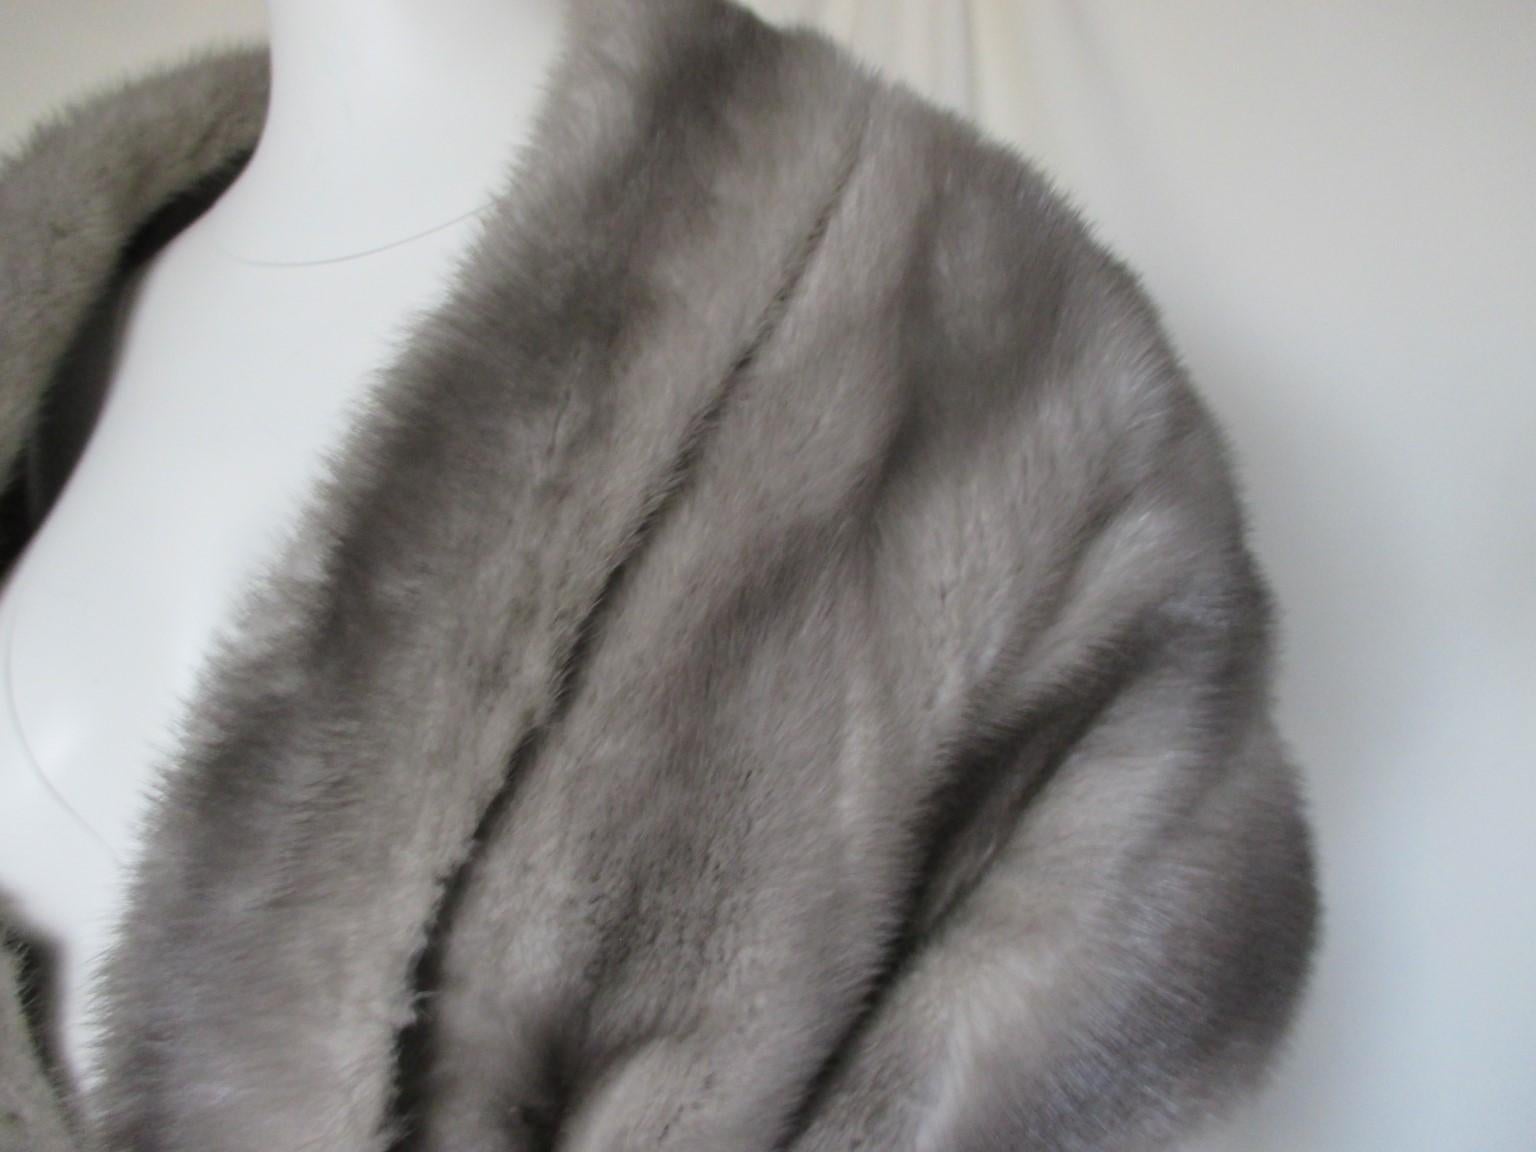 This beautiful stole is made of mink fur made by Saga furs Scandinavia, specially selected mink.

We offer more luxury fur products, view our frontstore.

Details:
Grey mink with lining
Furrier : Marcel Maky, Bruxelles
No closing hook, you can close